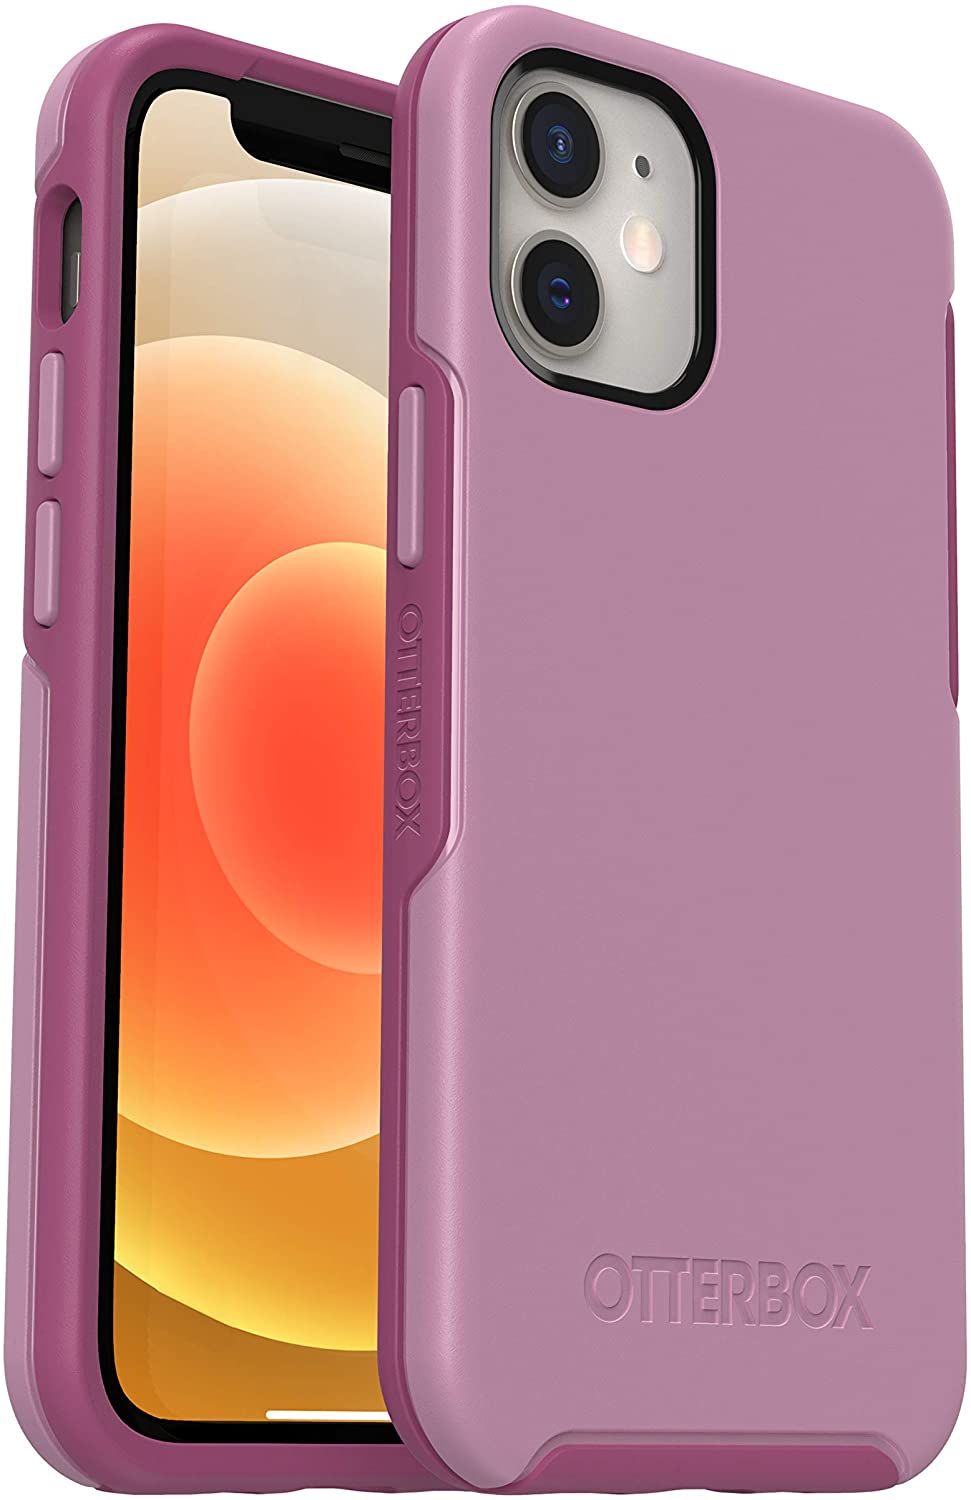 OtterBox SYMMETRY SERIES Case for Apple iPhone 12 Mini - Pink (New)